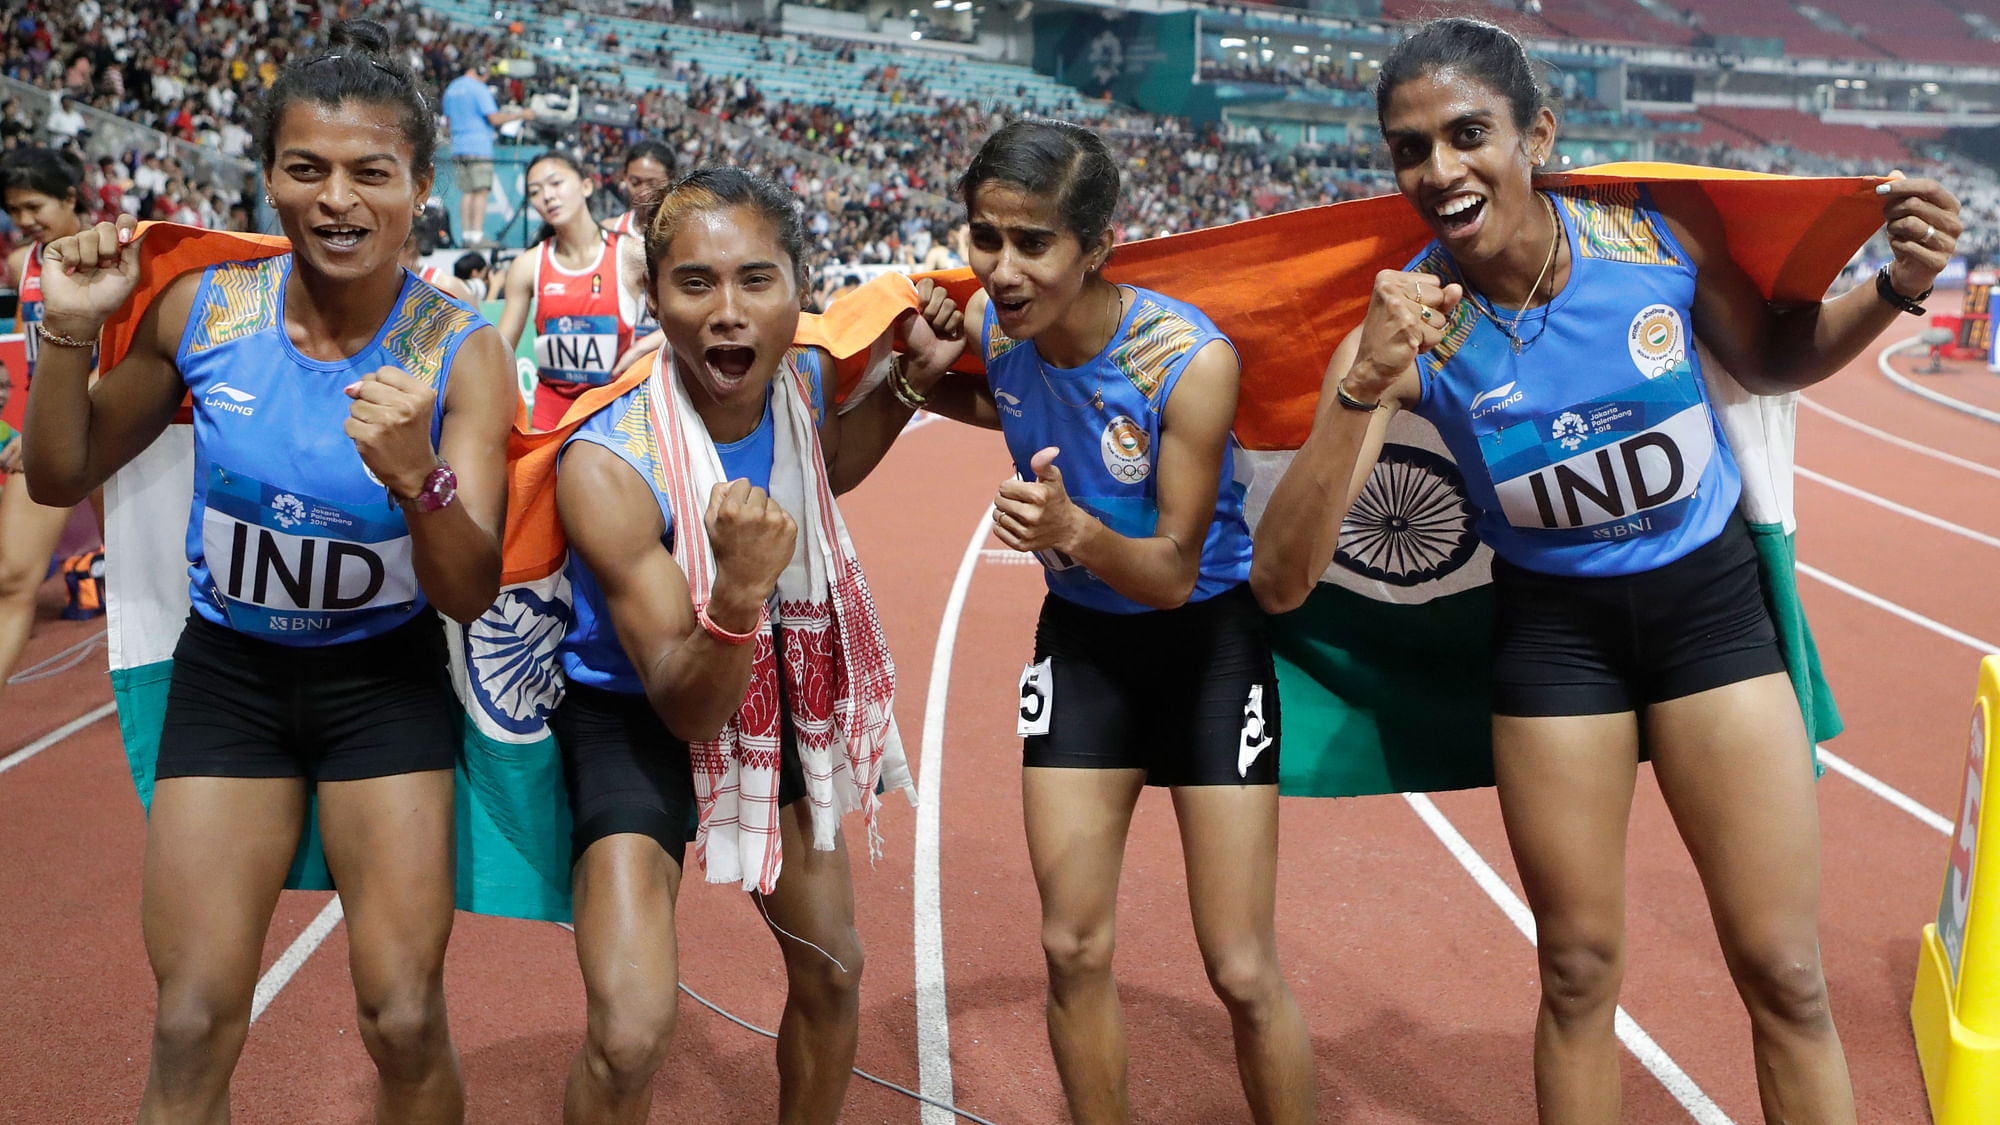 India’s 4x400m relay team celebrate after winning the gold medal during the athletics competition at the 18th Asian Games.